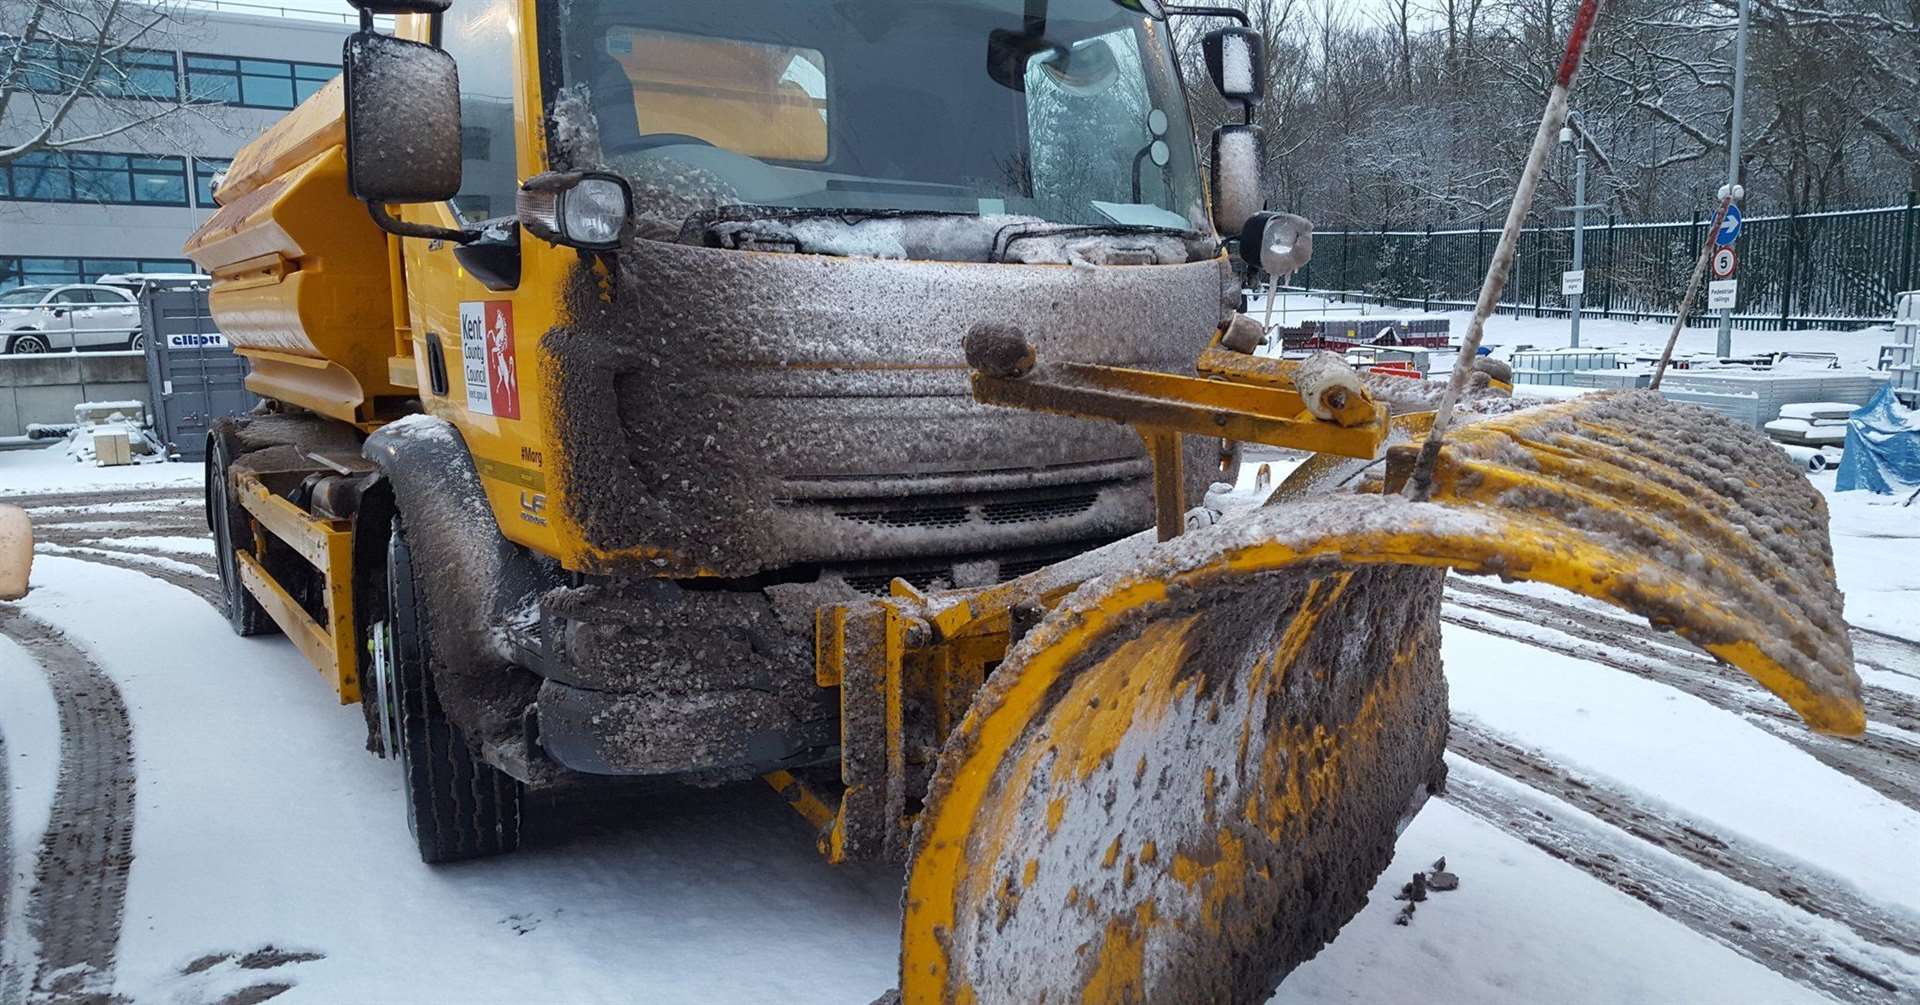 KCC use 64 winter service vehicles (including 4 mini gritters to treat narrower roads) to grit Kent's roads and have more on standby.